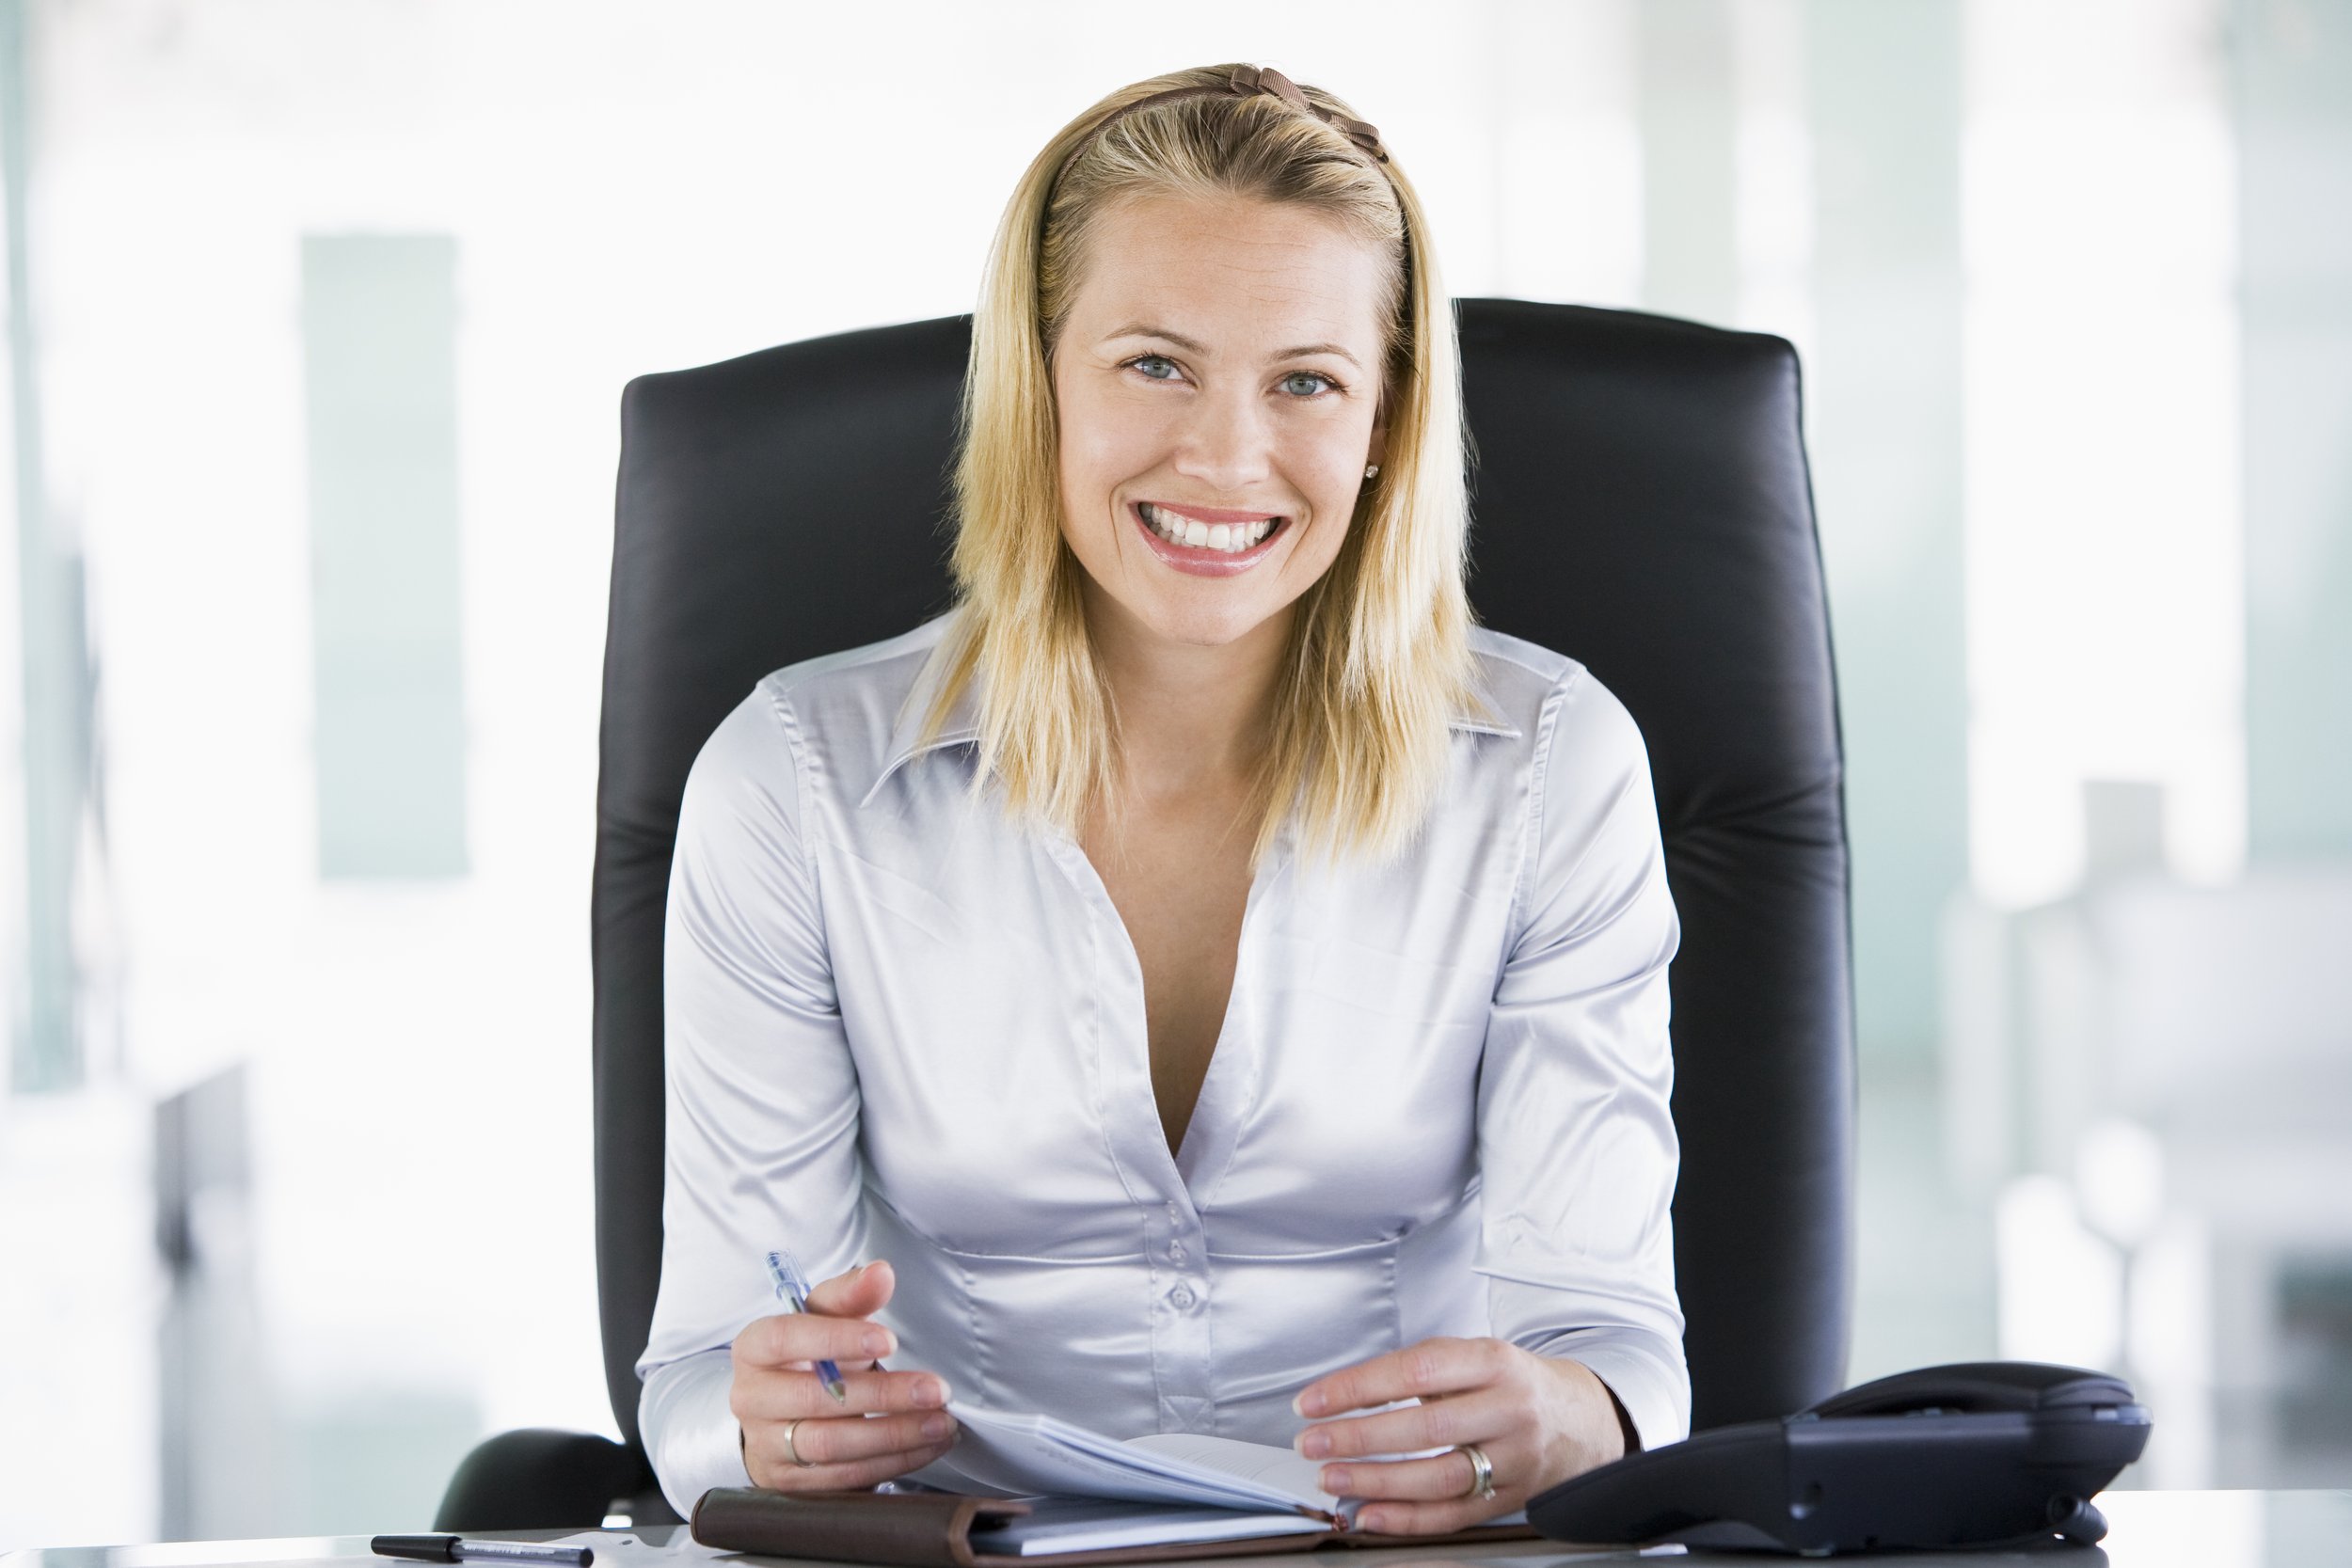 businesswoman-in-office-with-personal-organizer-smiling-SBI-301023044.jpg